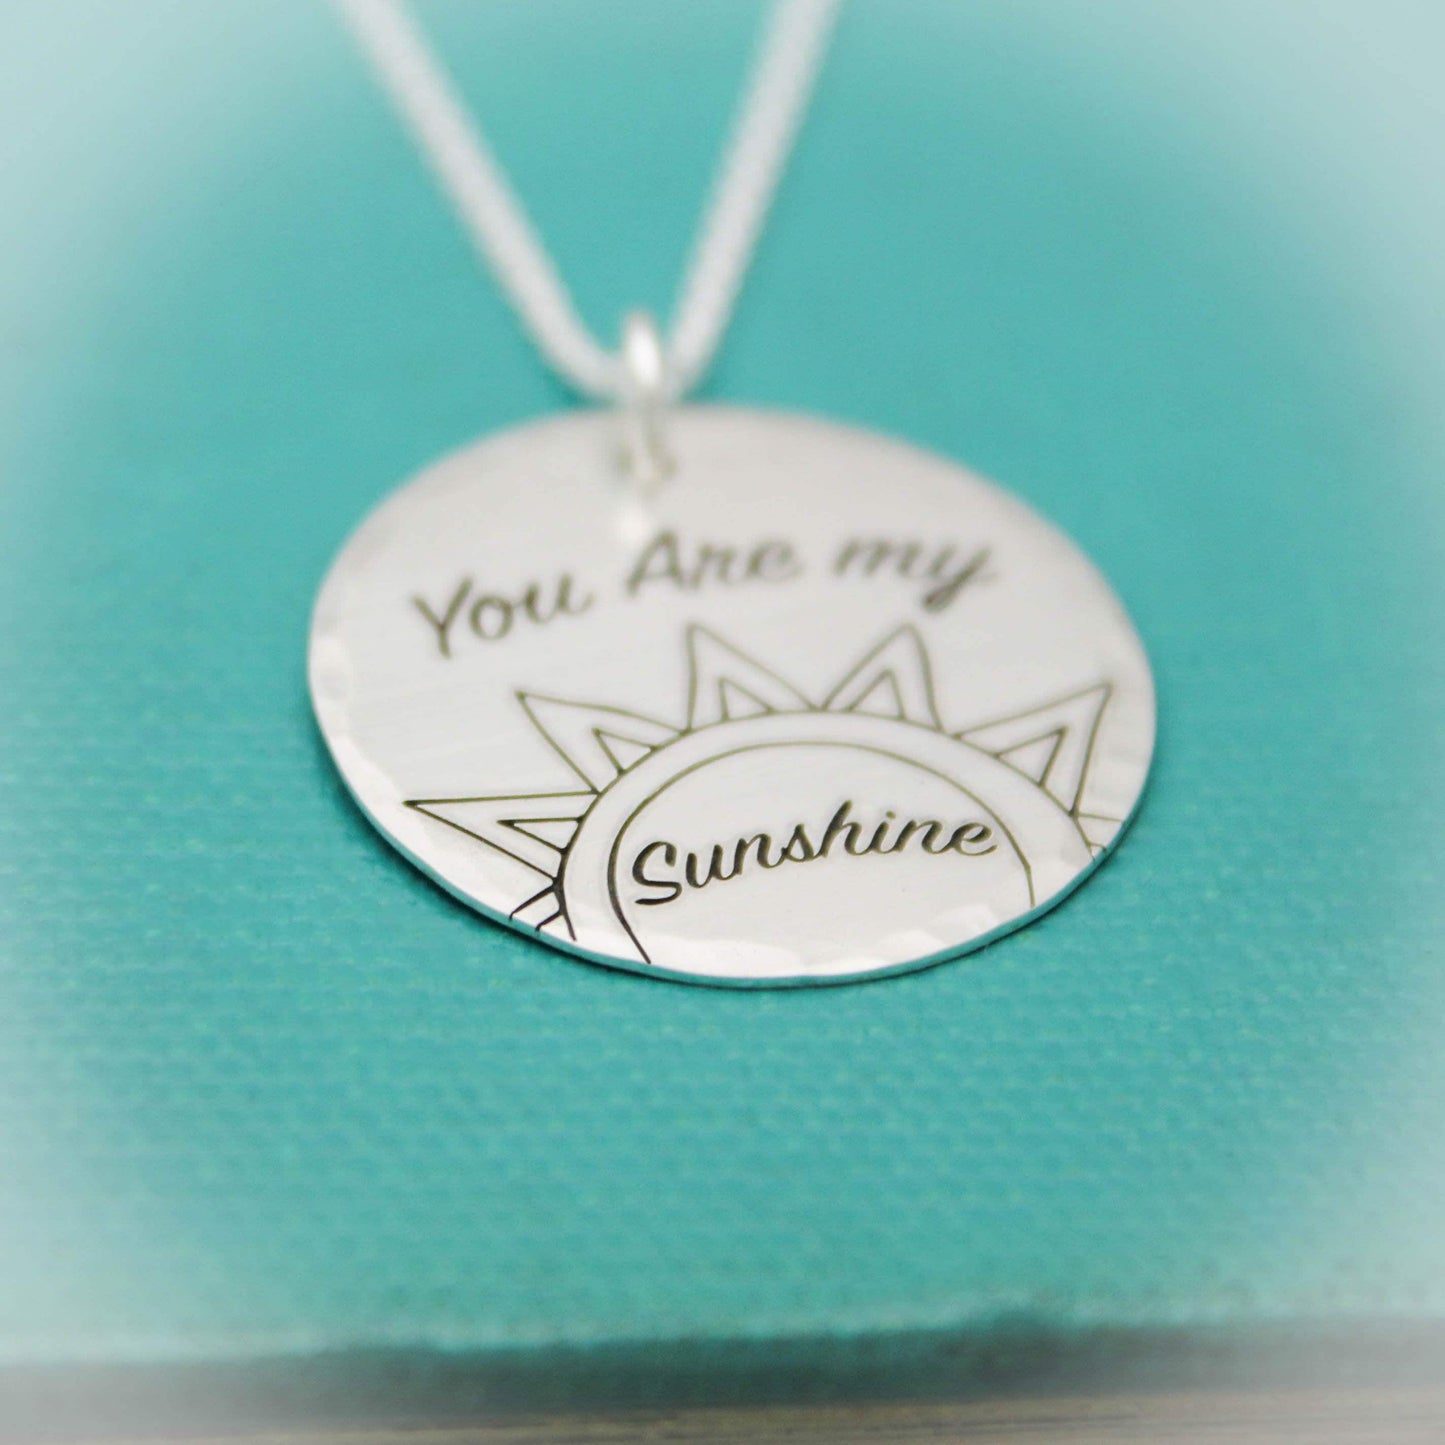 You Are My Sunshine Necklace, Sun Jewelry, Sunshine Necklace, Mother Necklace, Grandmother Necklace, Gifts for Her, Personalized Jewelry